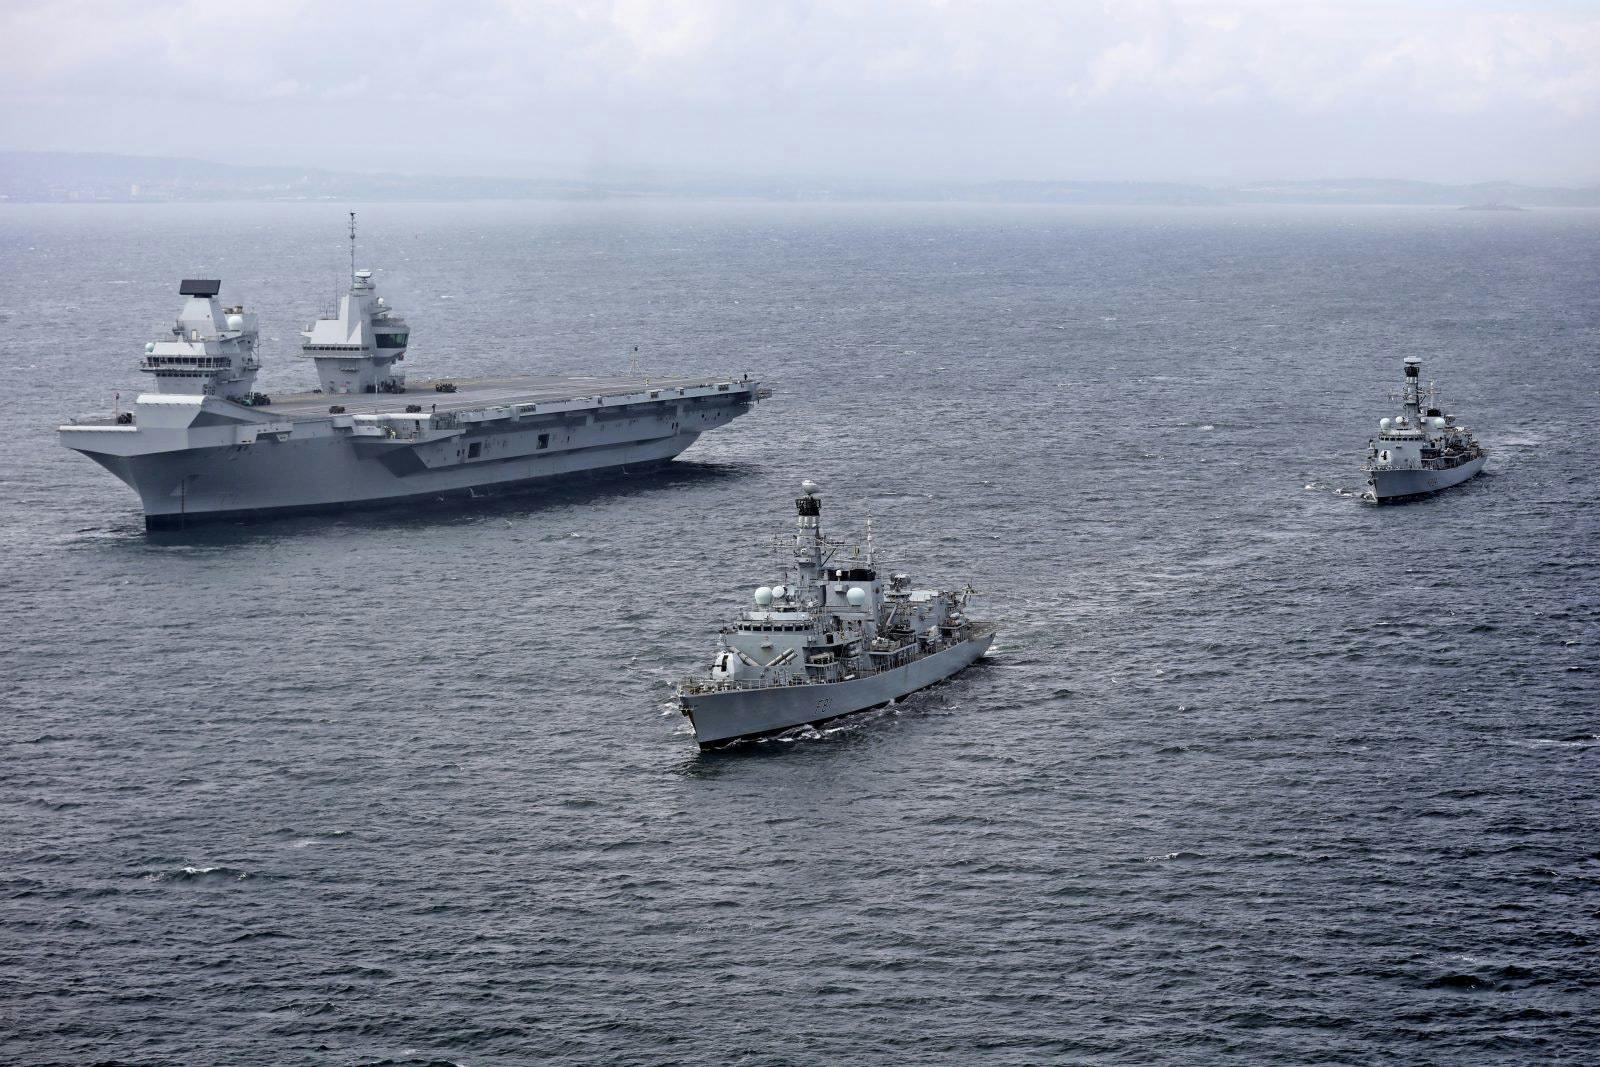 Royal Navy now has enough crew for both carriers and their escorts